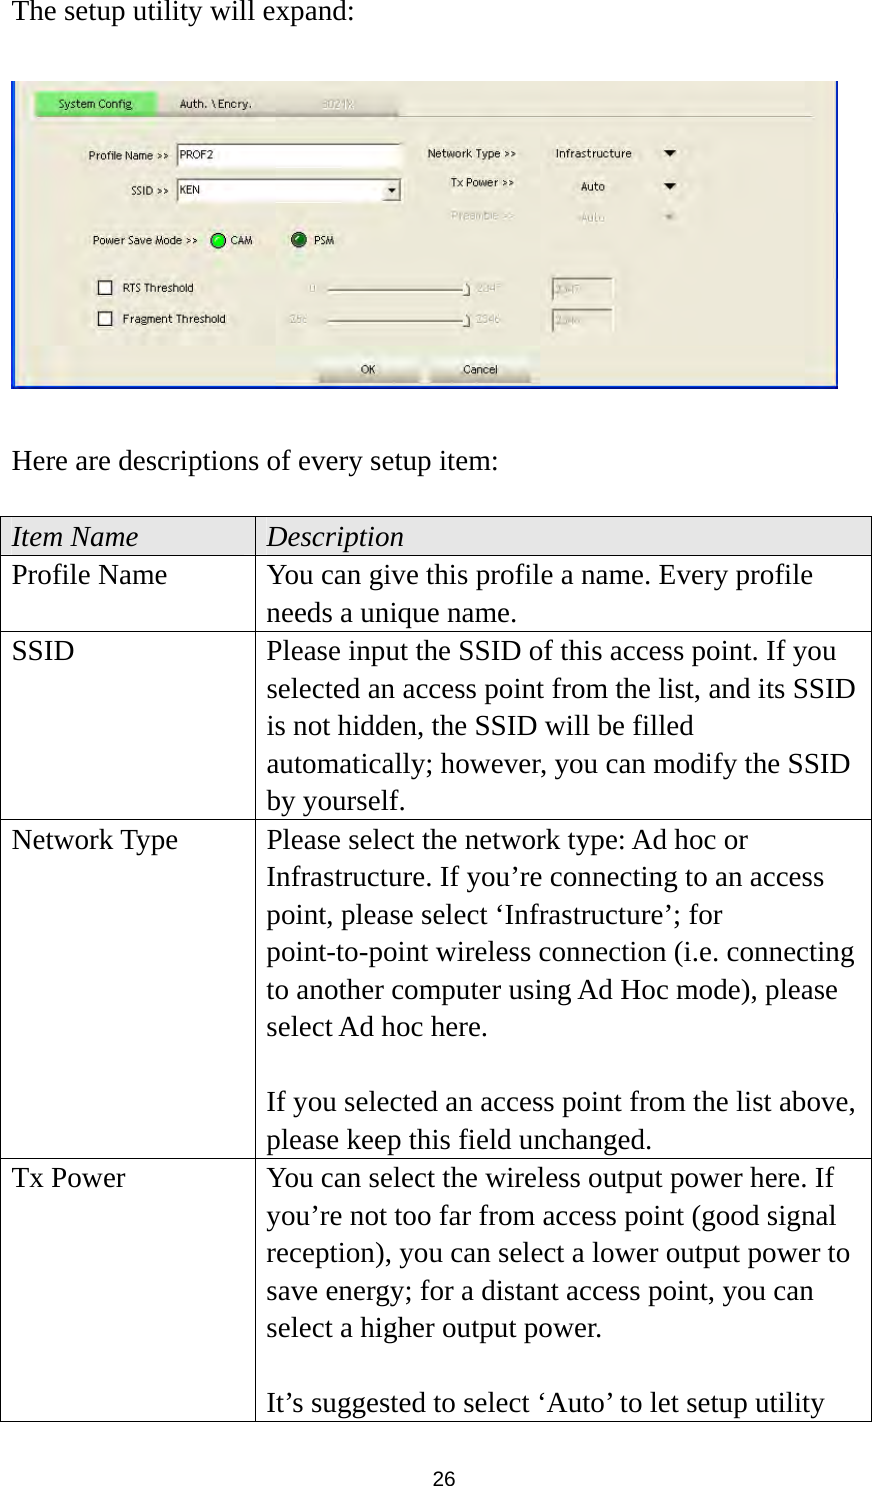  26 The setup utility will expand:    Here are descriptions of every setup item:  Item Name  Description Profile Name  You can give this profile a name. Every profile needs a unique name. SSID  Please input the SSID of this access point. If you selected an access point from the list, and its SSID is not hidden, the SSID will be filled automatically; however, you can modify the SSID by yourself. Network Type  Please select the network type: Ad hoc or Infrastructure. If you’re connecting to an access point, please select ‘Infrastructure’; for point-to-point wireless connection (i.e. connecting to another computer using Ad Hoc mode), please select Ad hoc here.  If you selected an access point from the list above, please keep this field unchanged. Tx Power  You can select the wireless output power here. If you’re not too far from access point (good signal reception), you can select a lower output power to save energy; for a distant access point, you can select a higher output power.    It’s suggested to select ‘Auto’ to let setup utility 